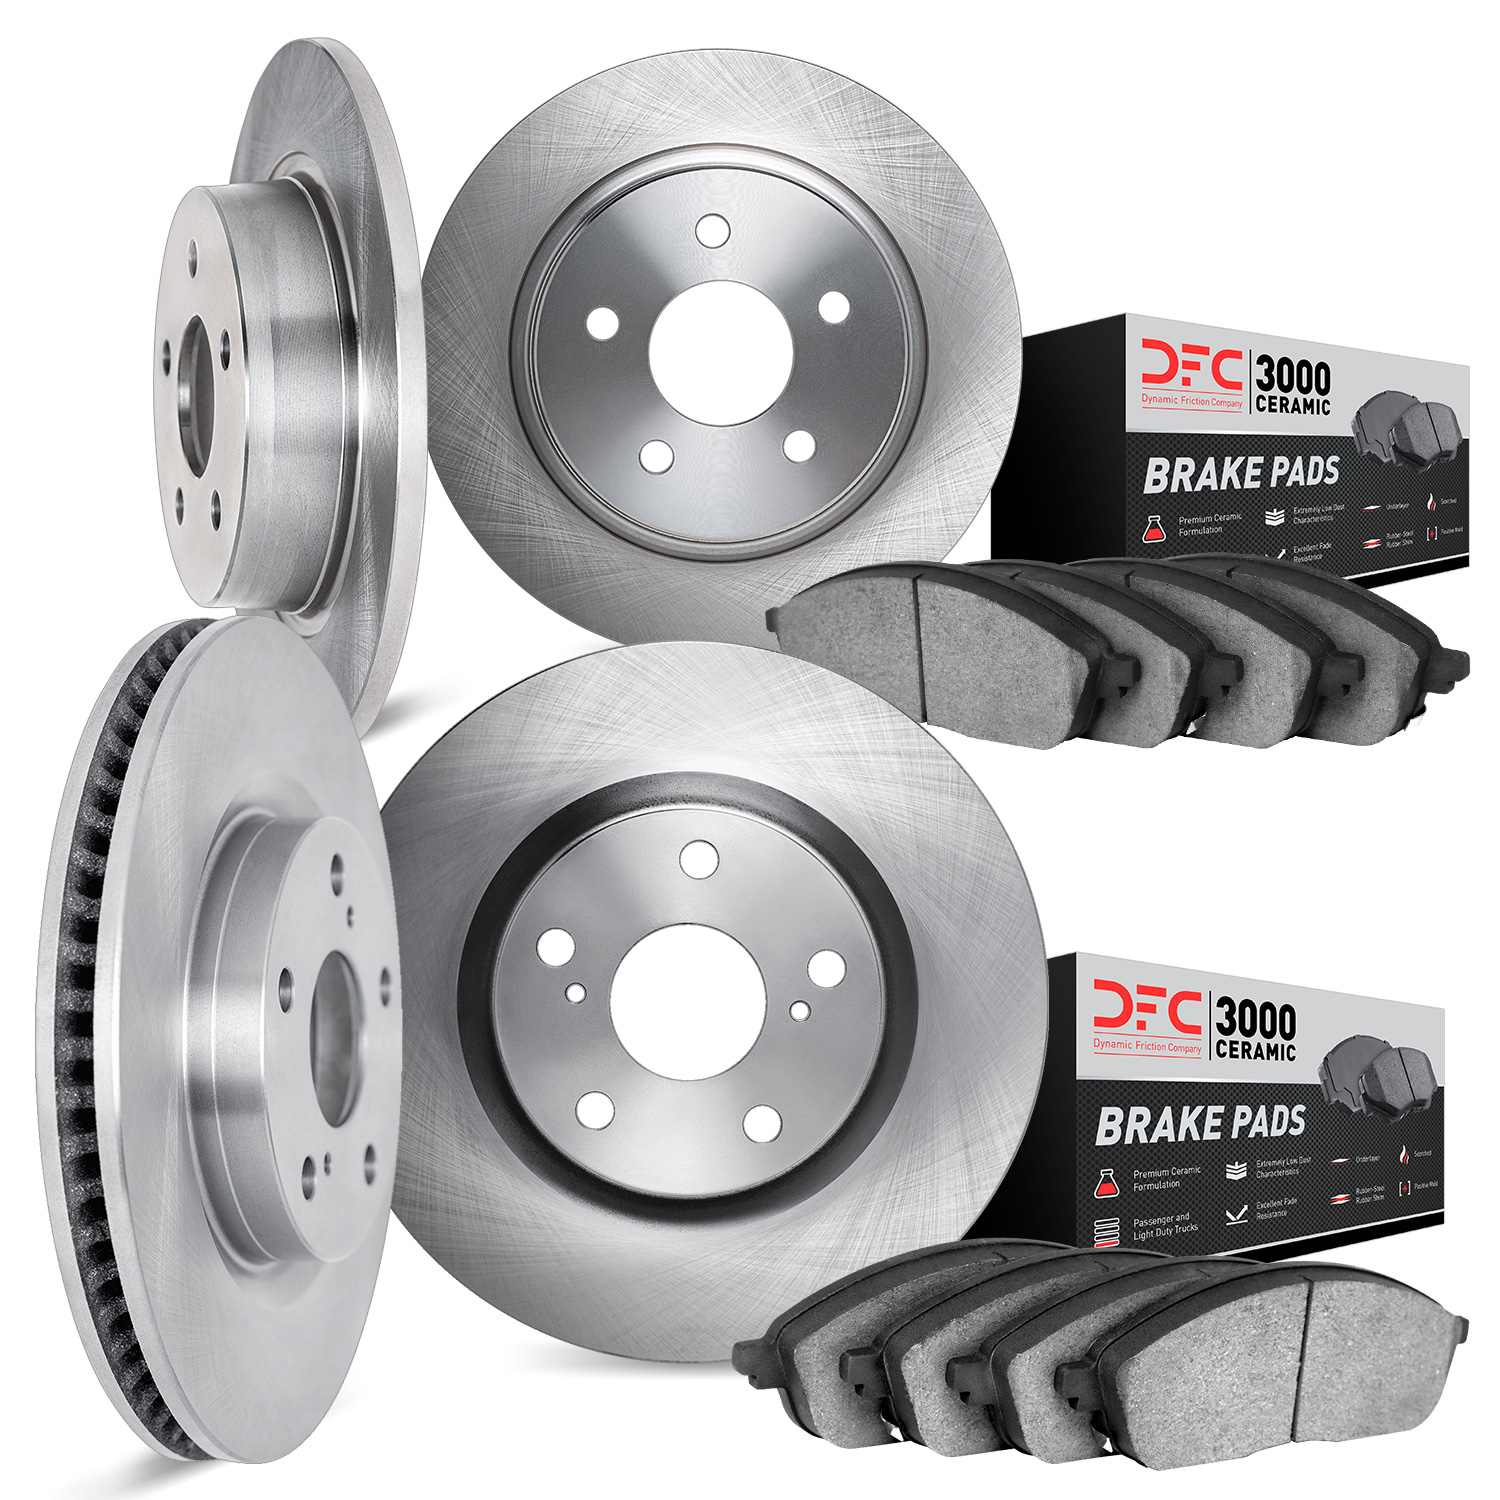 6304-76070 Brake Rotors with 3000-Series Ceramic Brake Pads Kit, 2004-2009 Lexus/Toyota/Scion, Position: Front and Rear